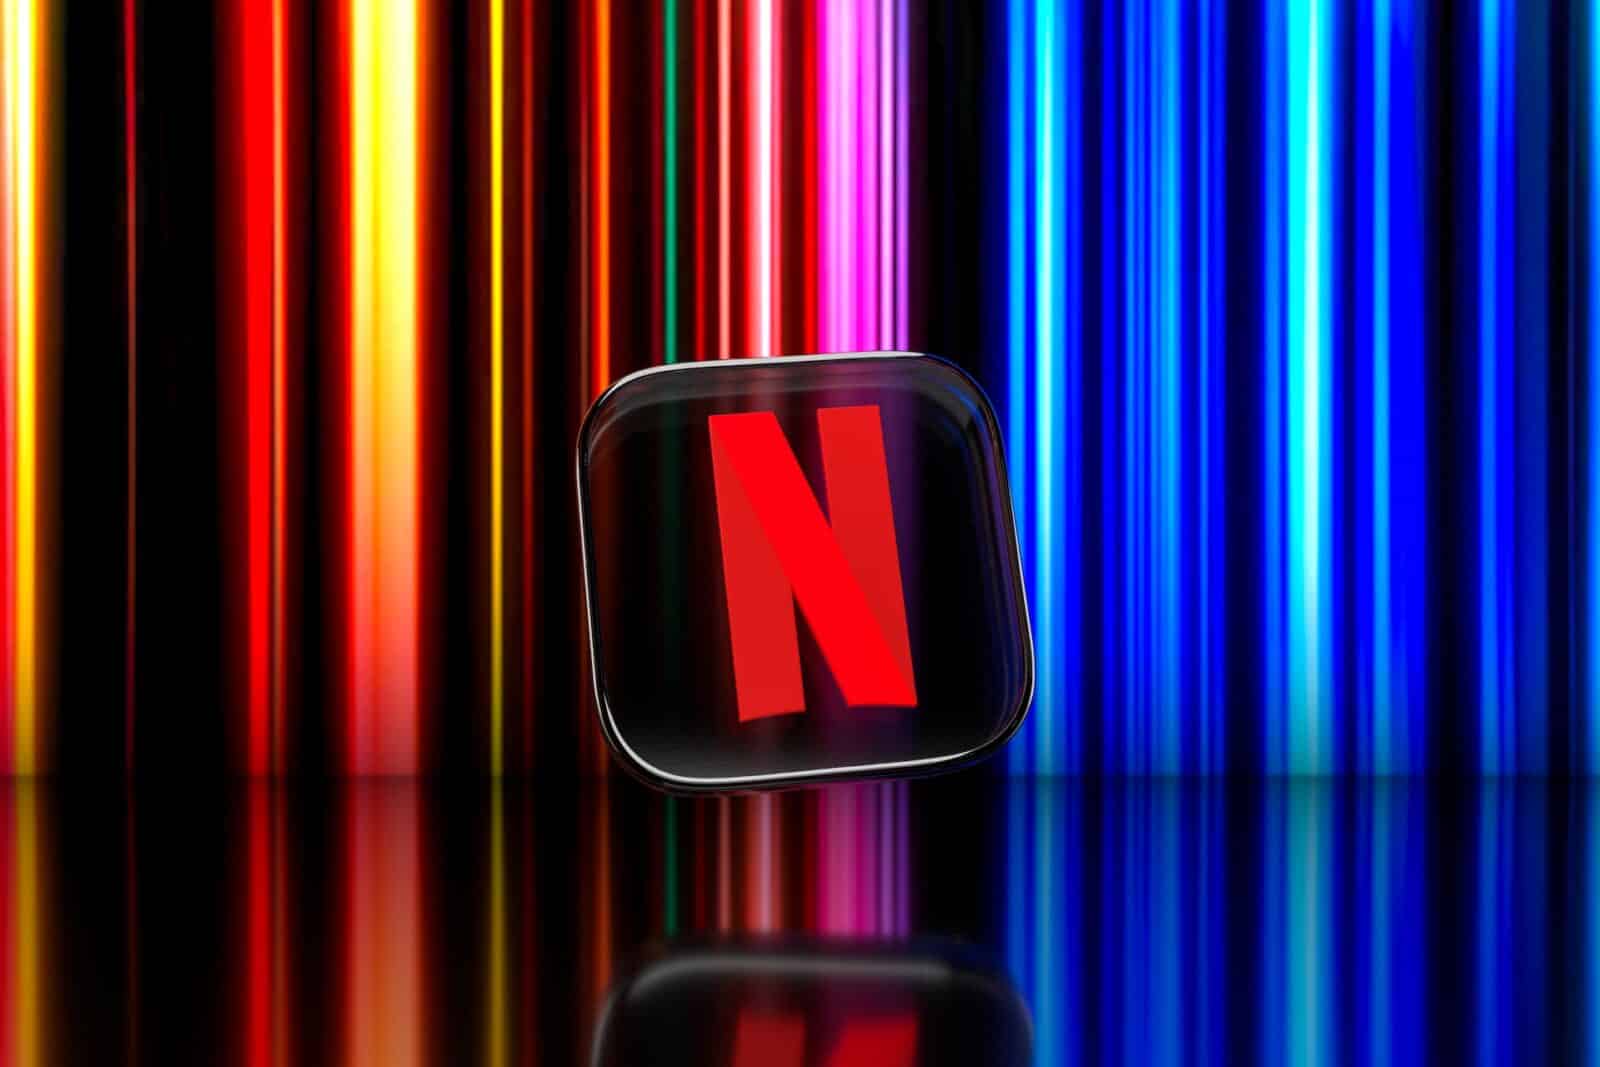 netflix-comment-creer-modifier-profil-smartphone-android